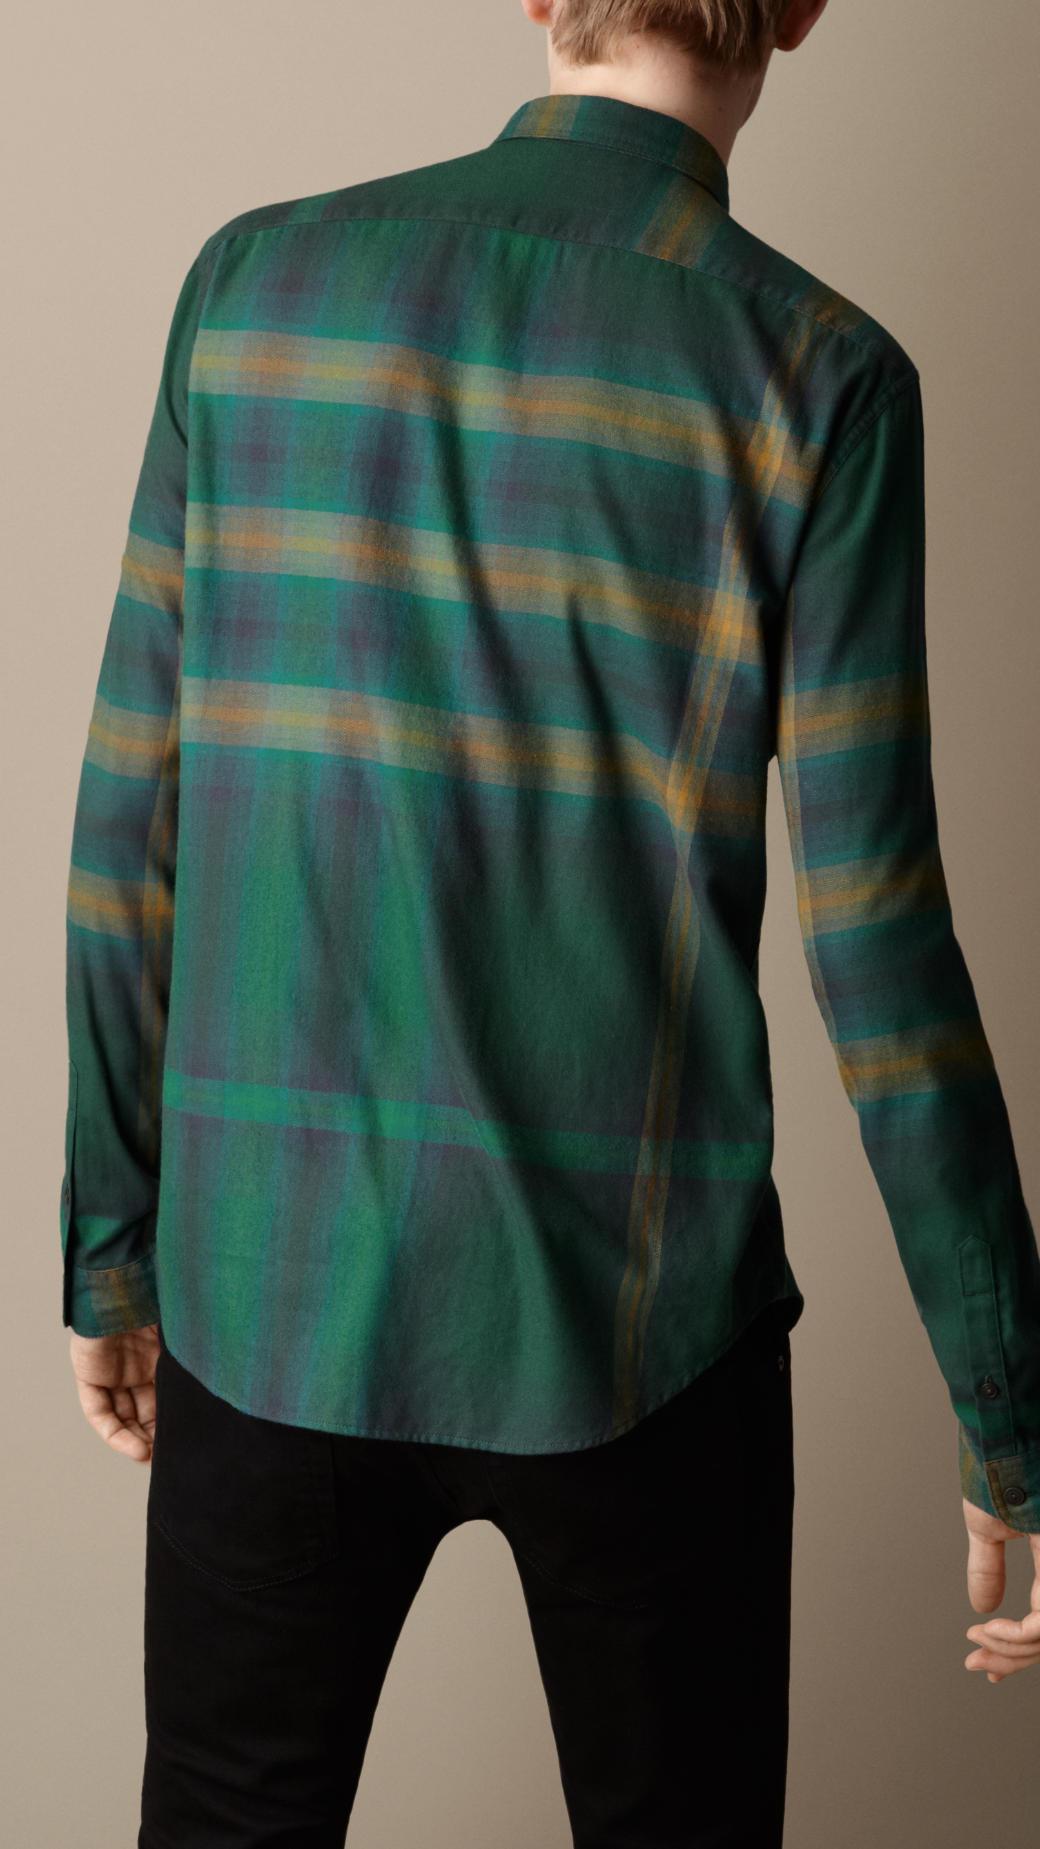 Lyst - Burberry Ombre Check Cotton Shirt in Green for Men